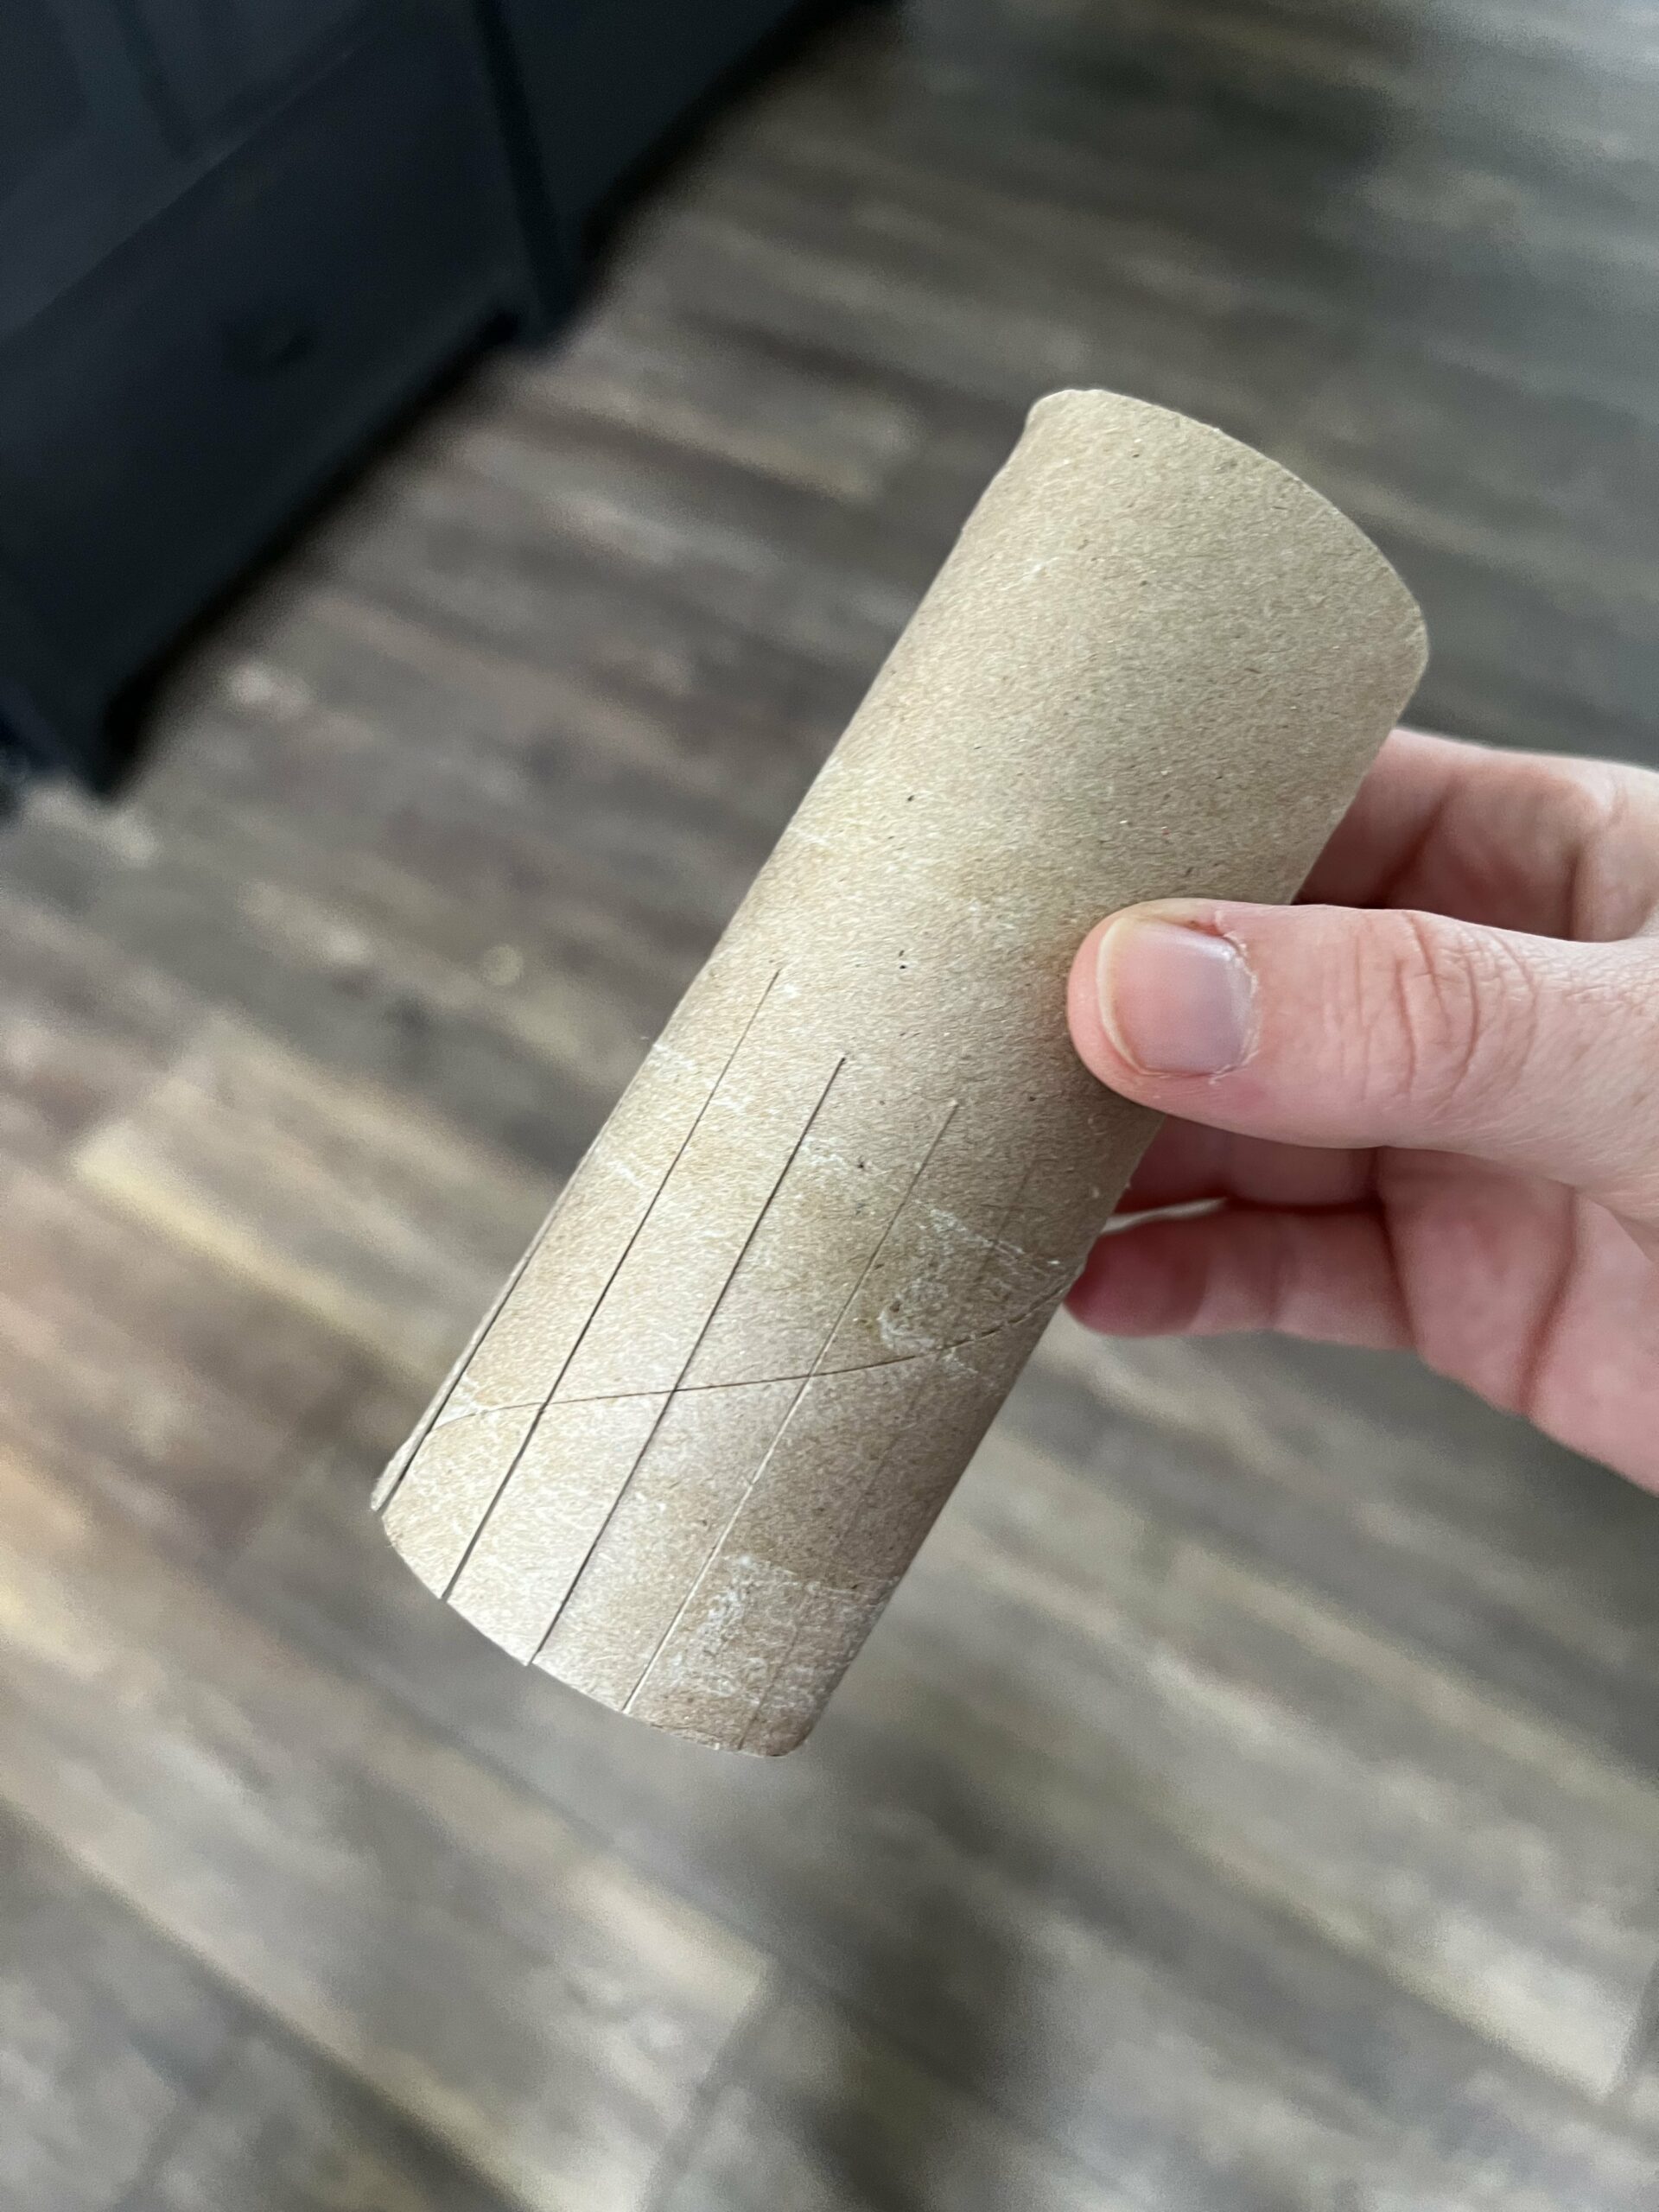 cutting slits in a toilet paper roll